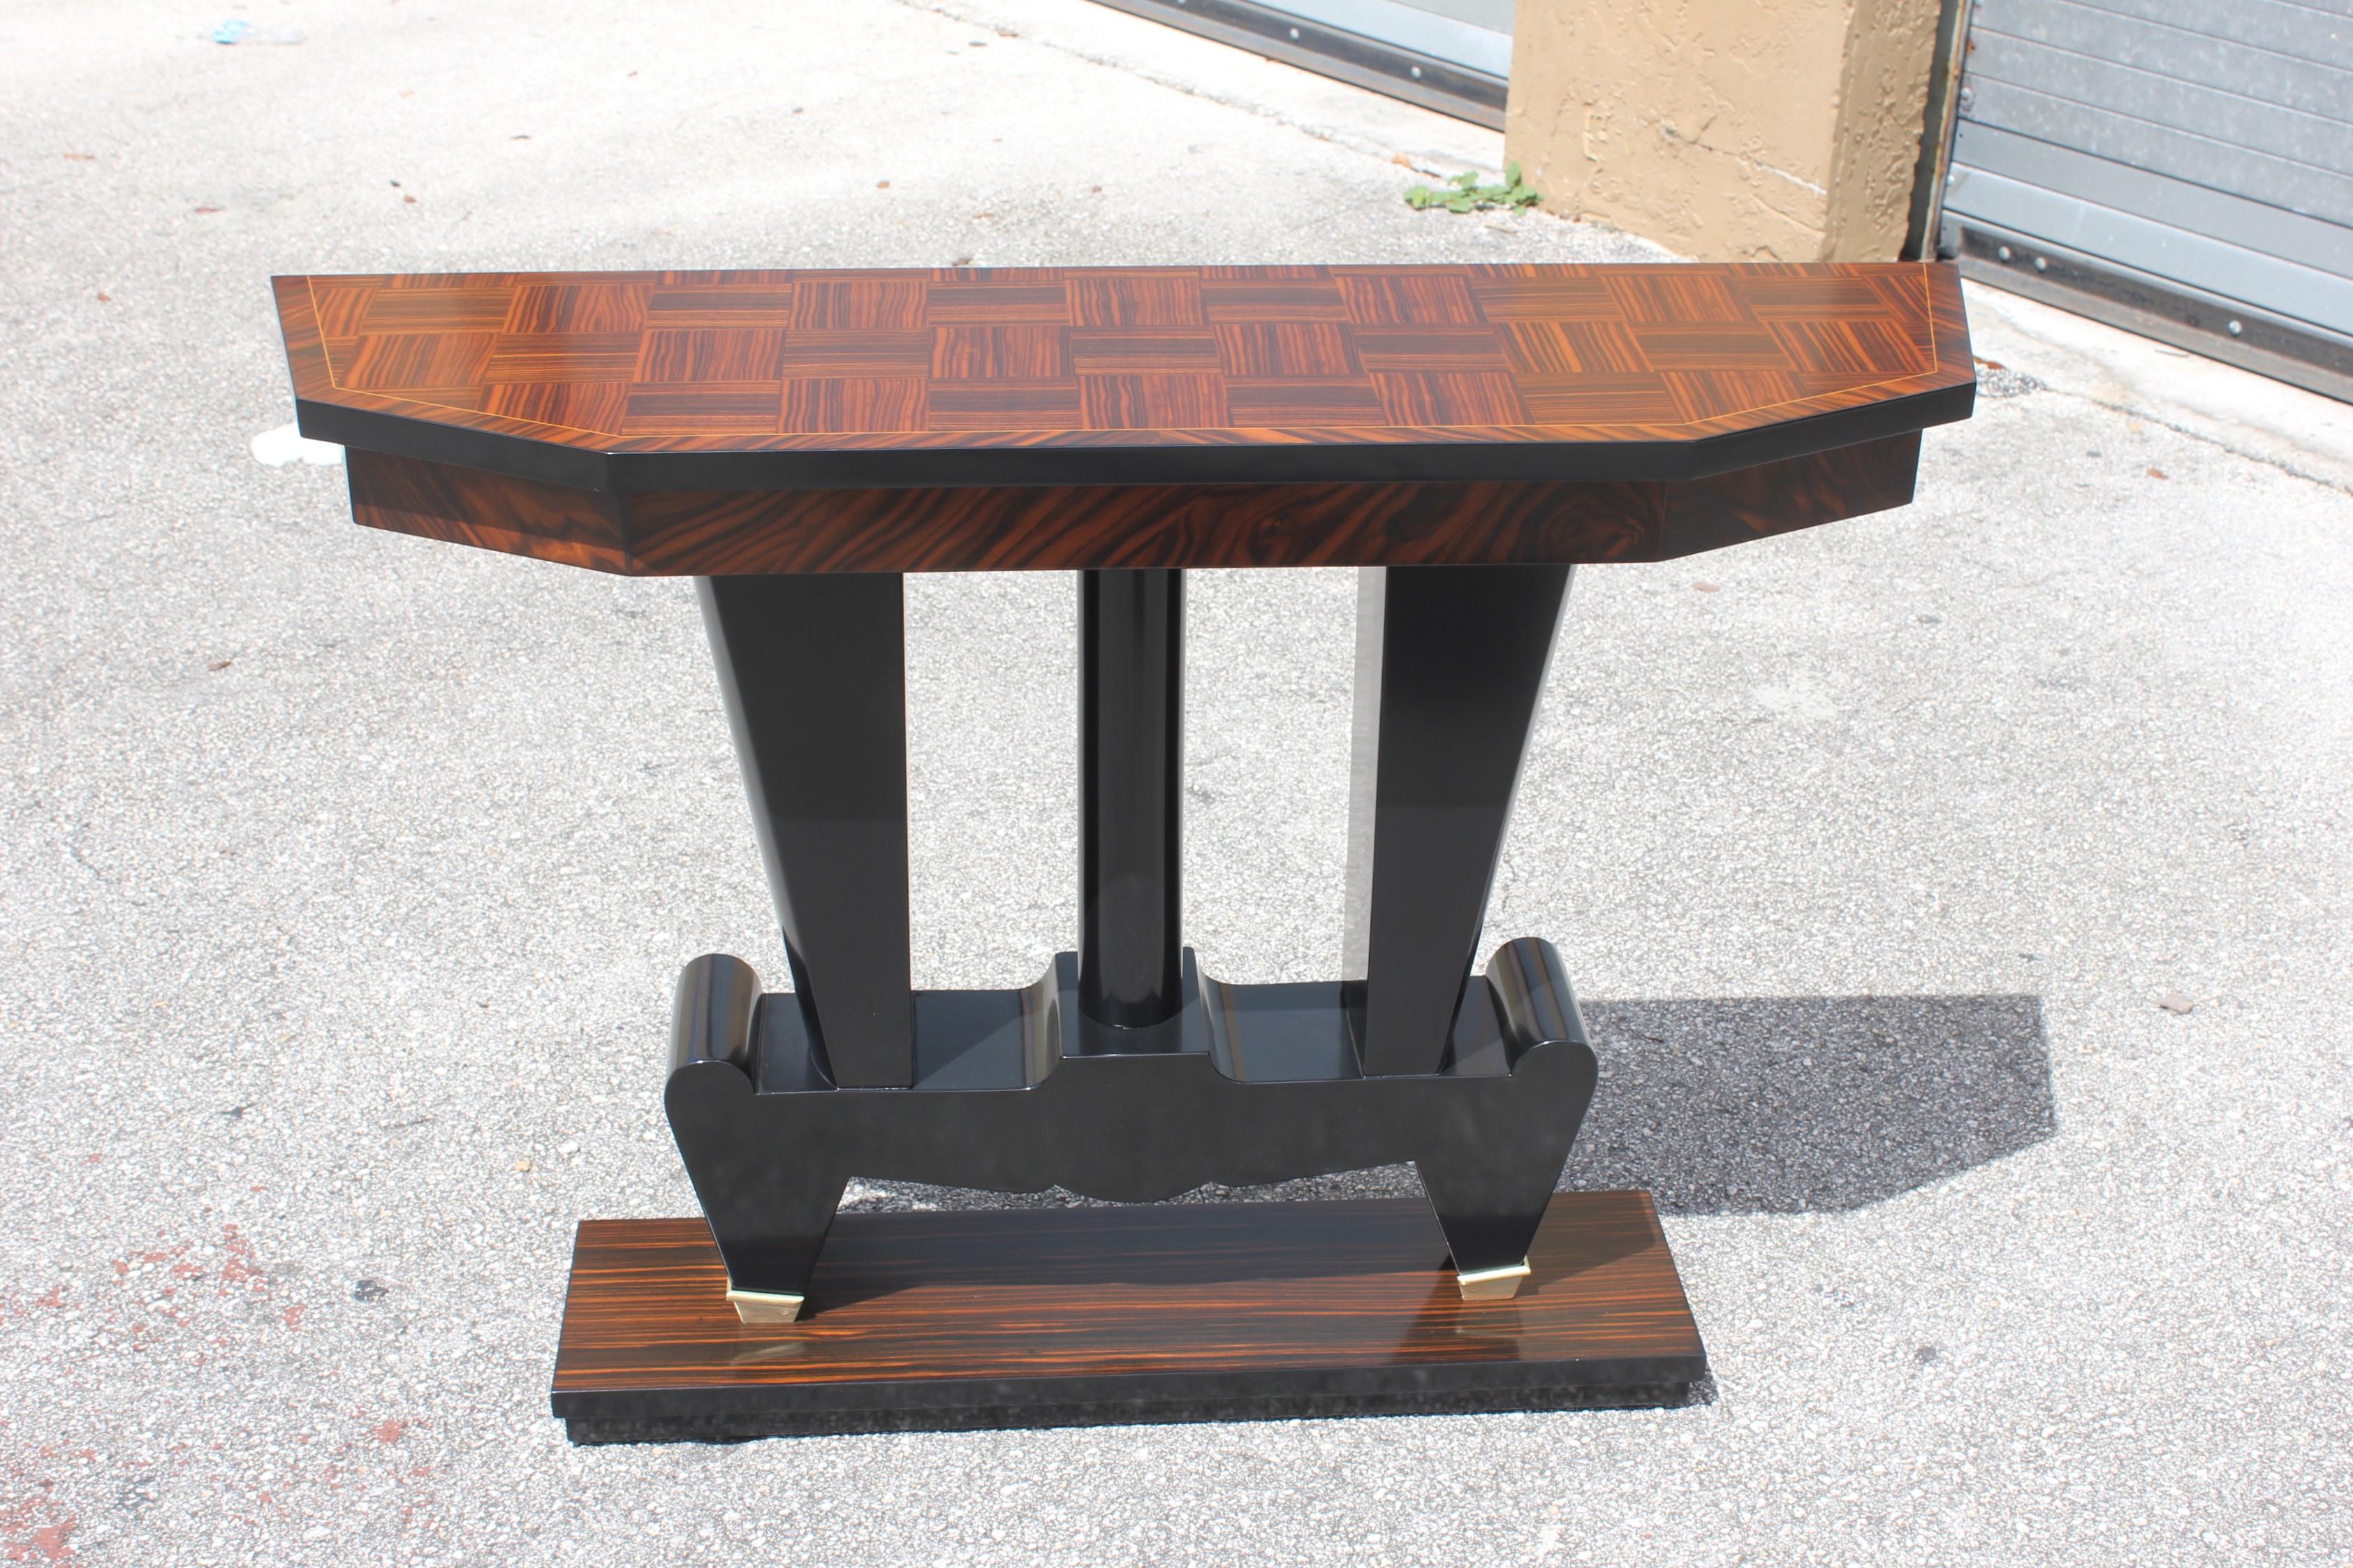 Unique French Art Deco exotic Macassar ebony console tables, circa 1940s. Beautiful Macassar ebony with black lacquer centre base, finish in both side, beautiful bronze hardware detail, that rest on makes it ideal for use as a bedside table or for